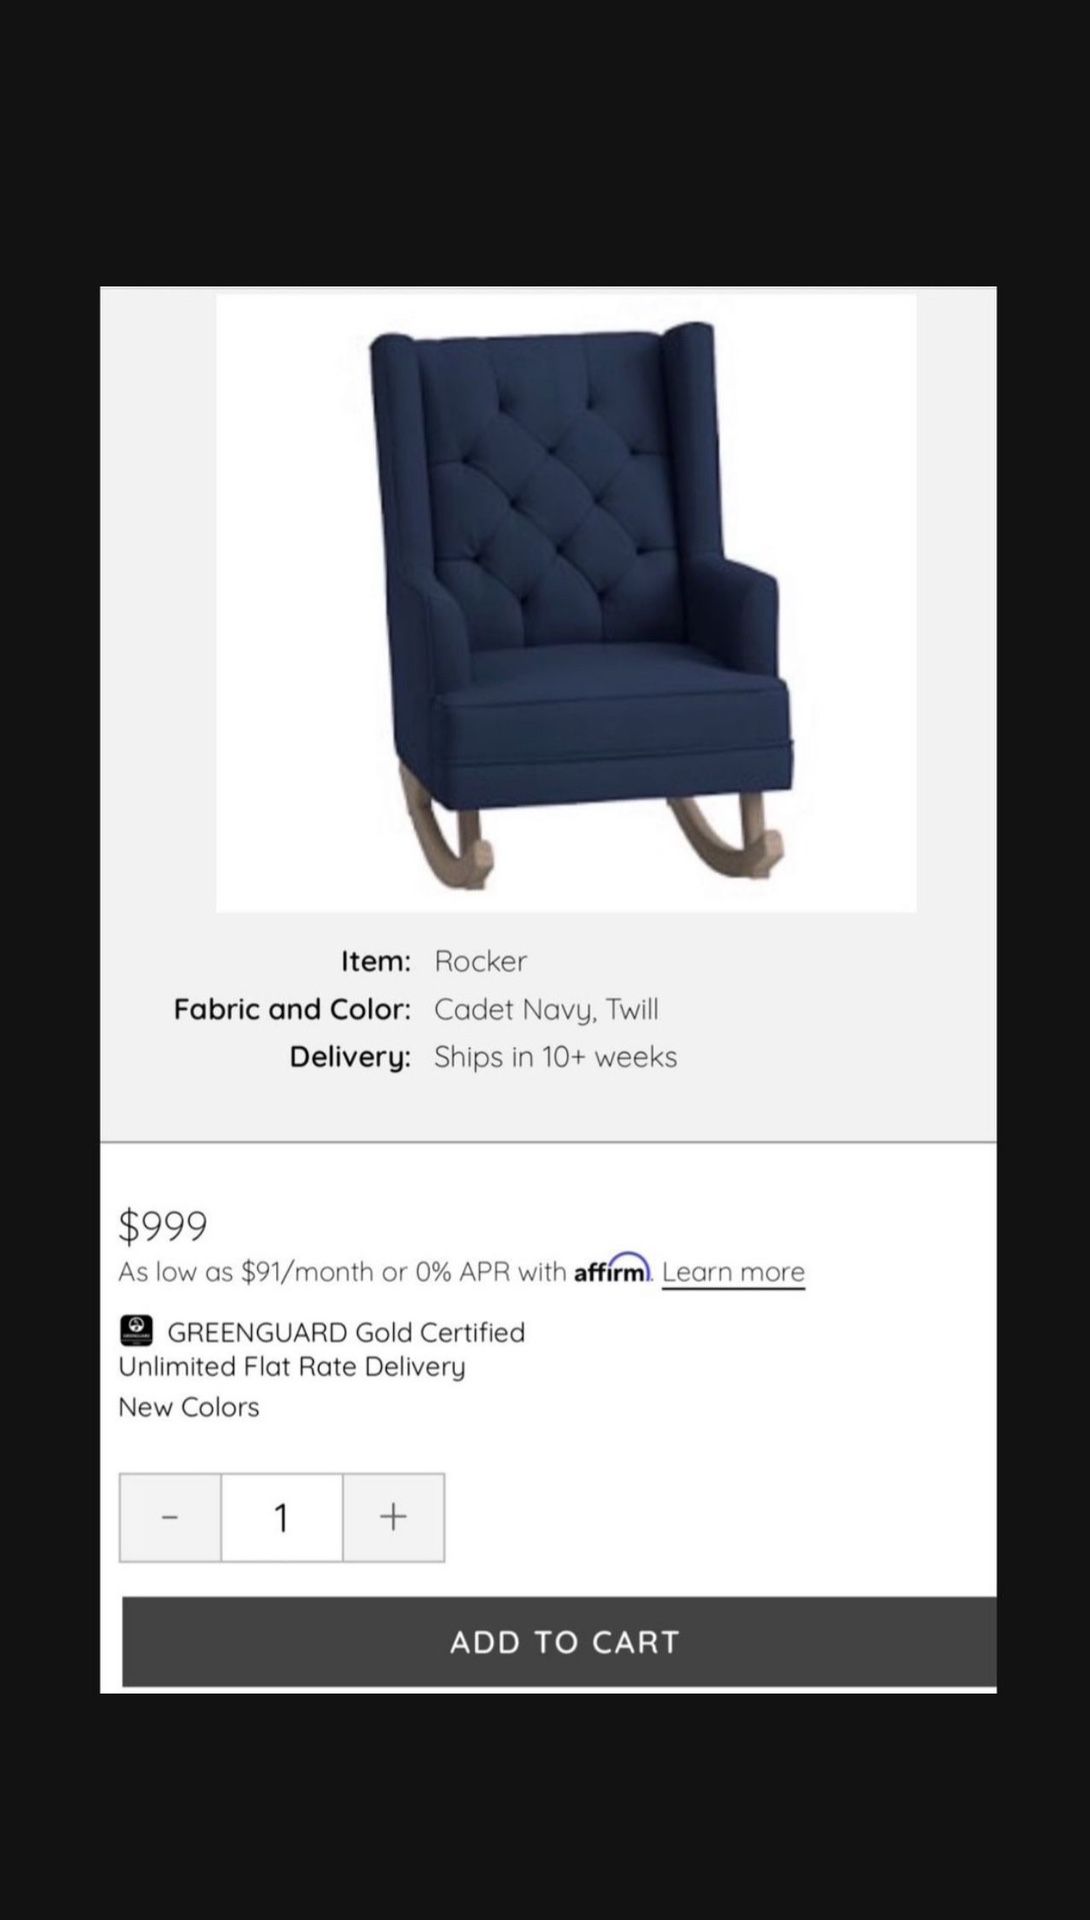 Pottery Barn Navy Blue Tufted Rocking Chair Nursery Rocker With Ottoman . Moving Selling All!